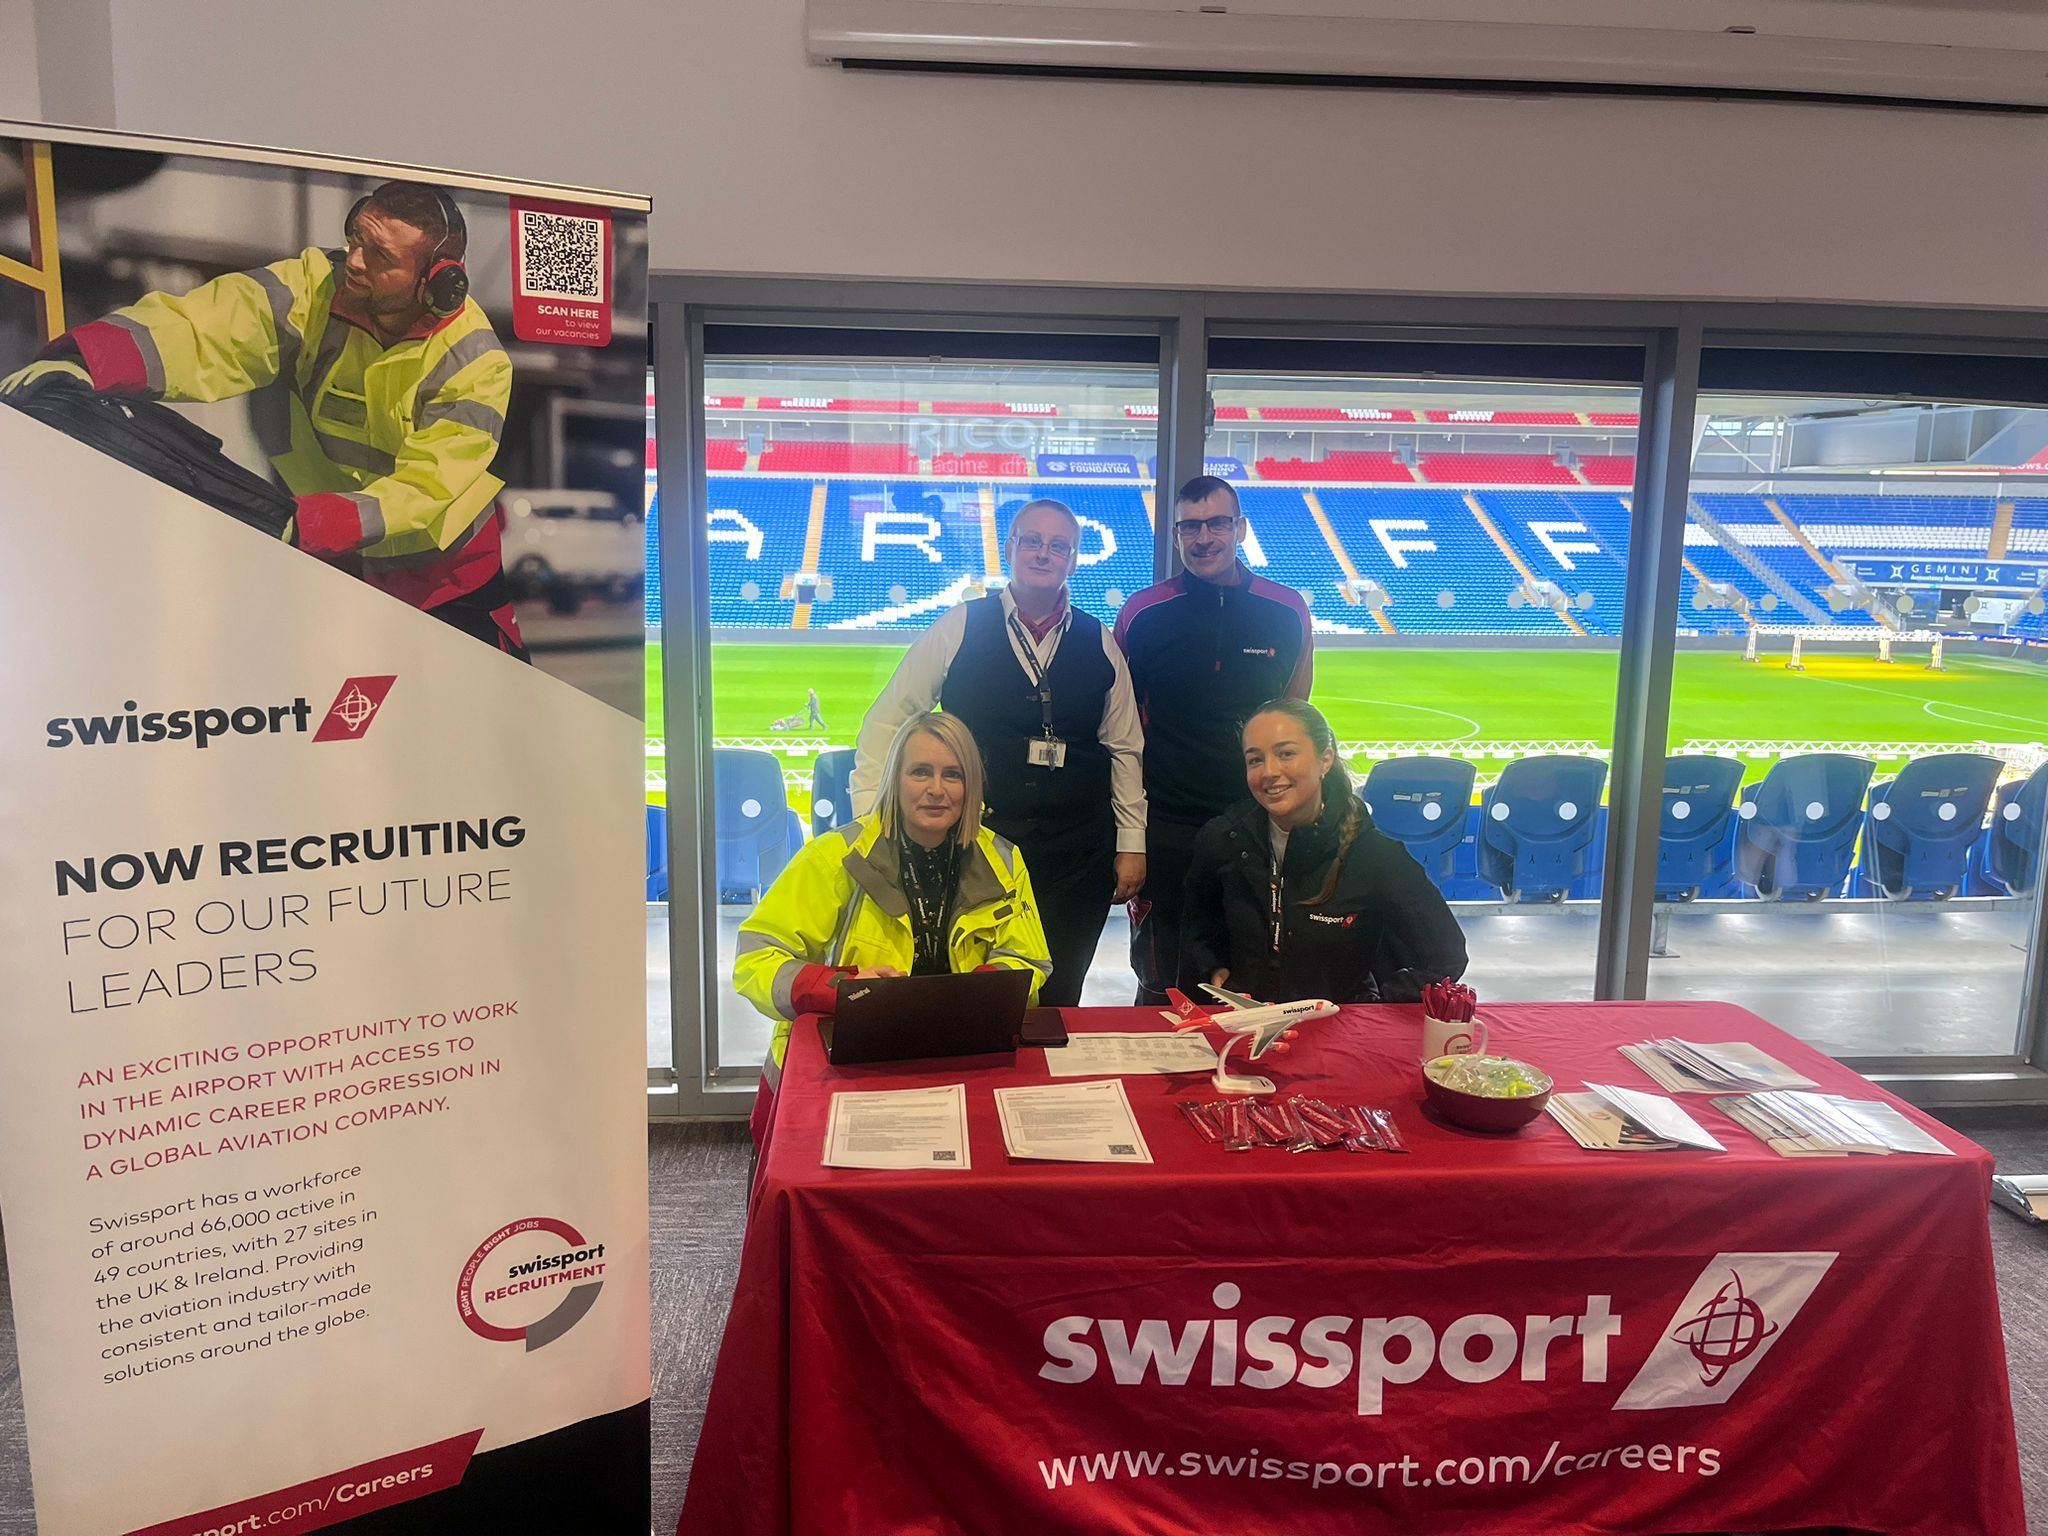 Swissport at our event in Cardiff